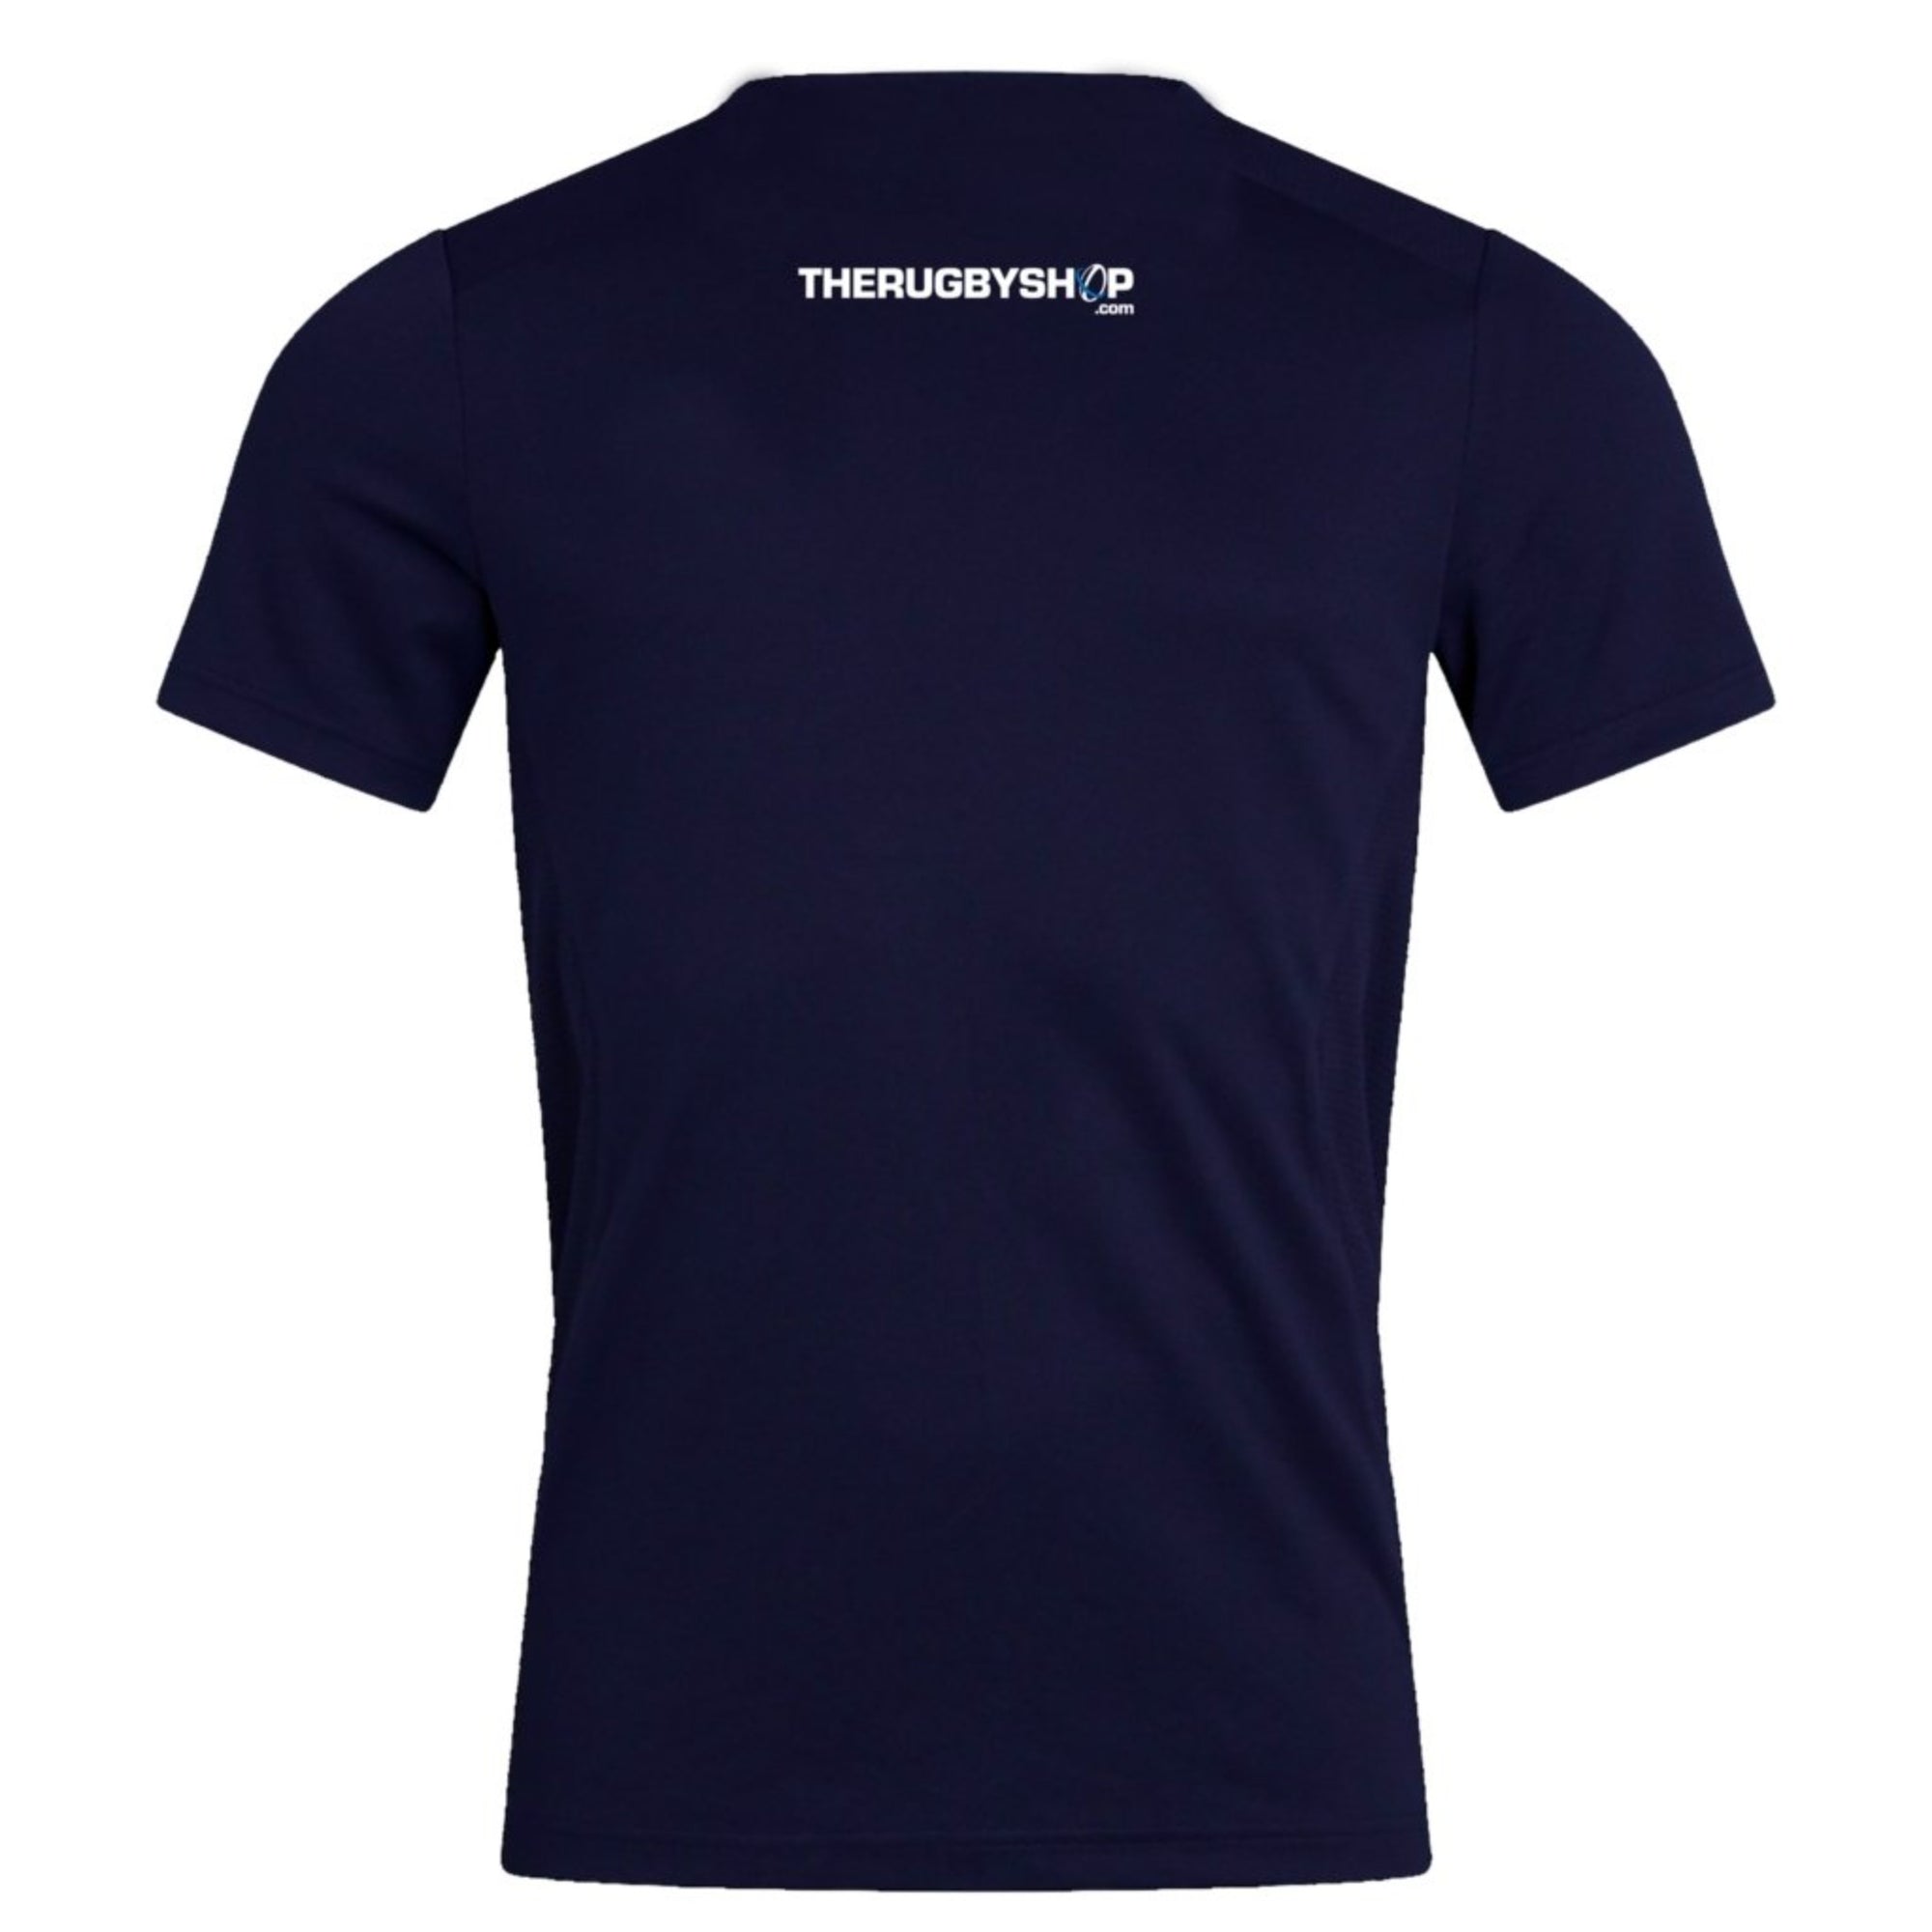 Rugby Ontario Referees CCC Club Dry Tee - www.therugbyshop.com www.therugbyshop.com UNISEX / NAVY / XS TRS Distribution Canada TEES Rugby Ontario Referees CCC Club Dry Tee